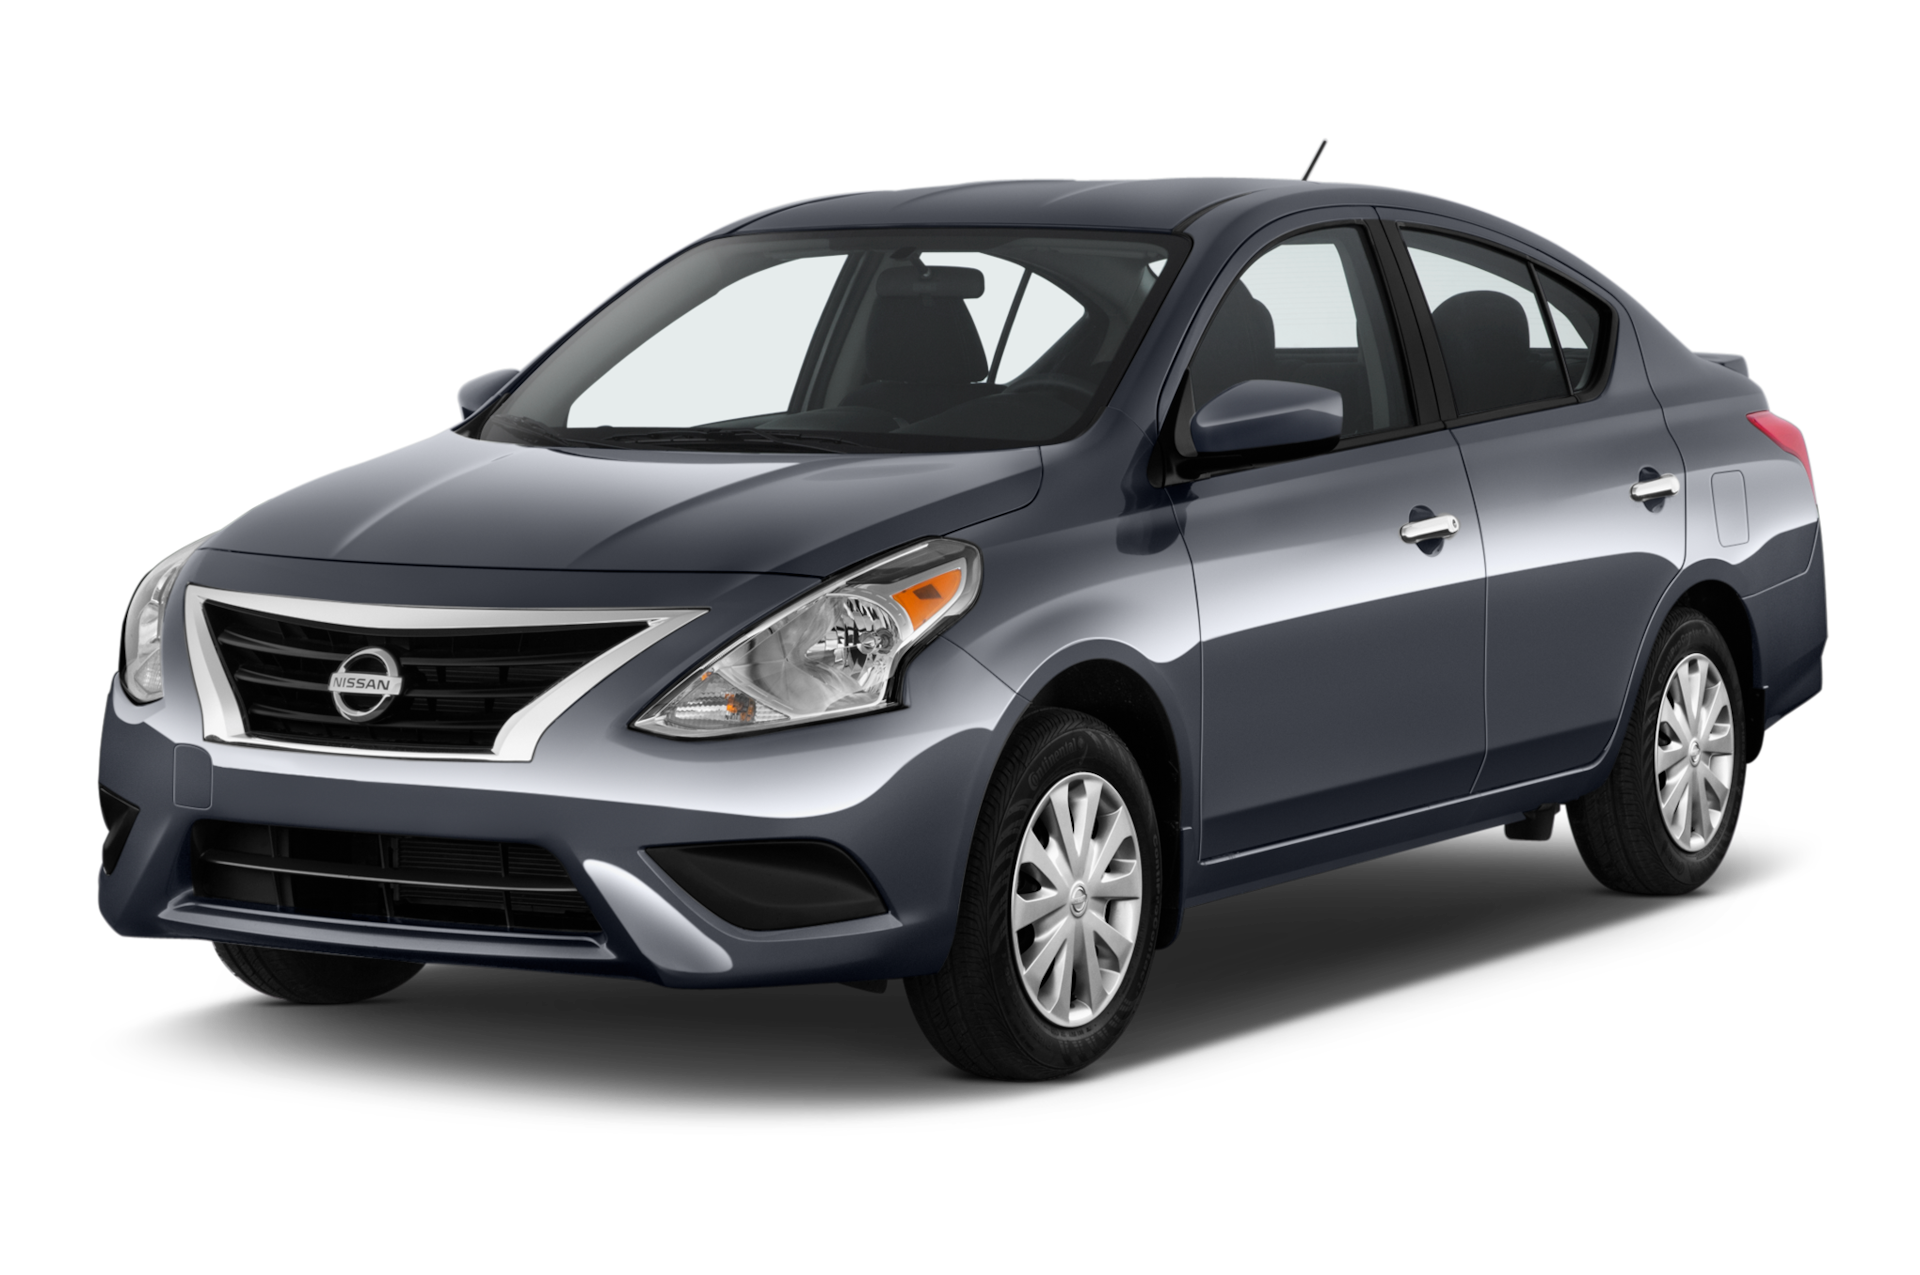 2019 Nissan Versa Prices, Reviews, and Photos - MotorTrend